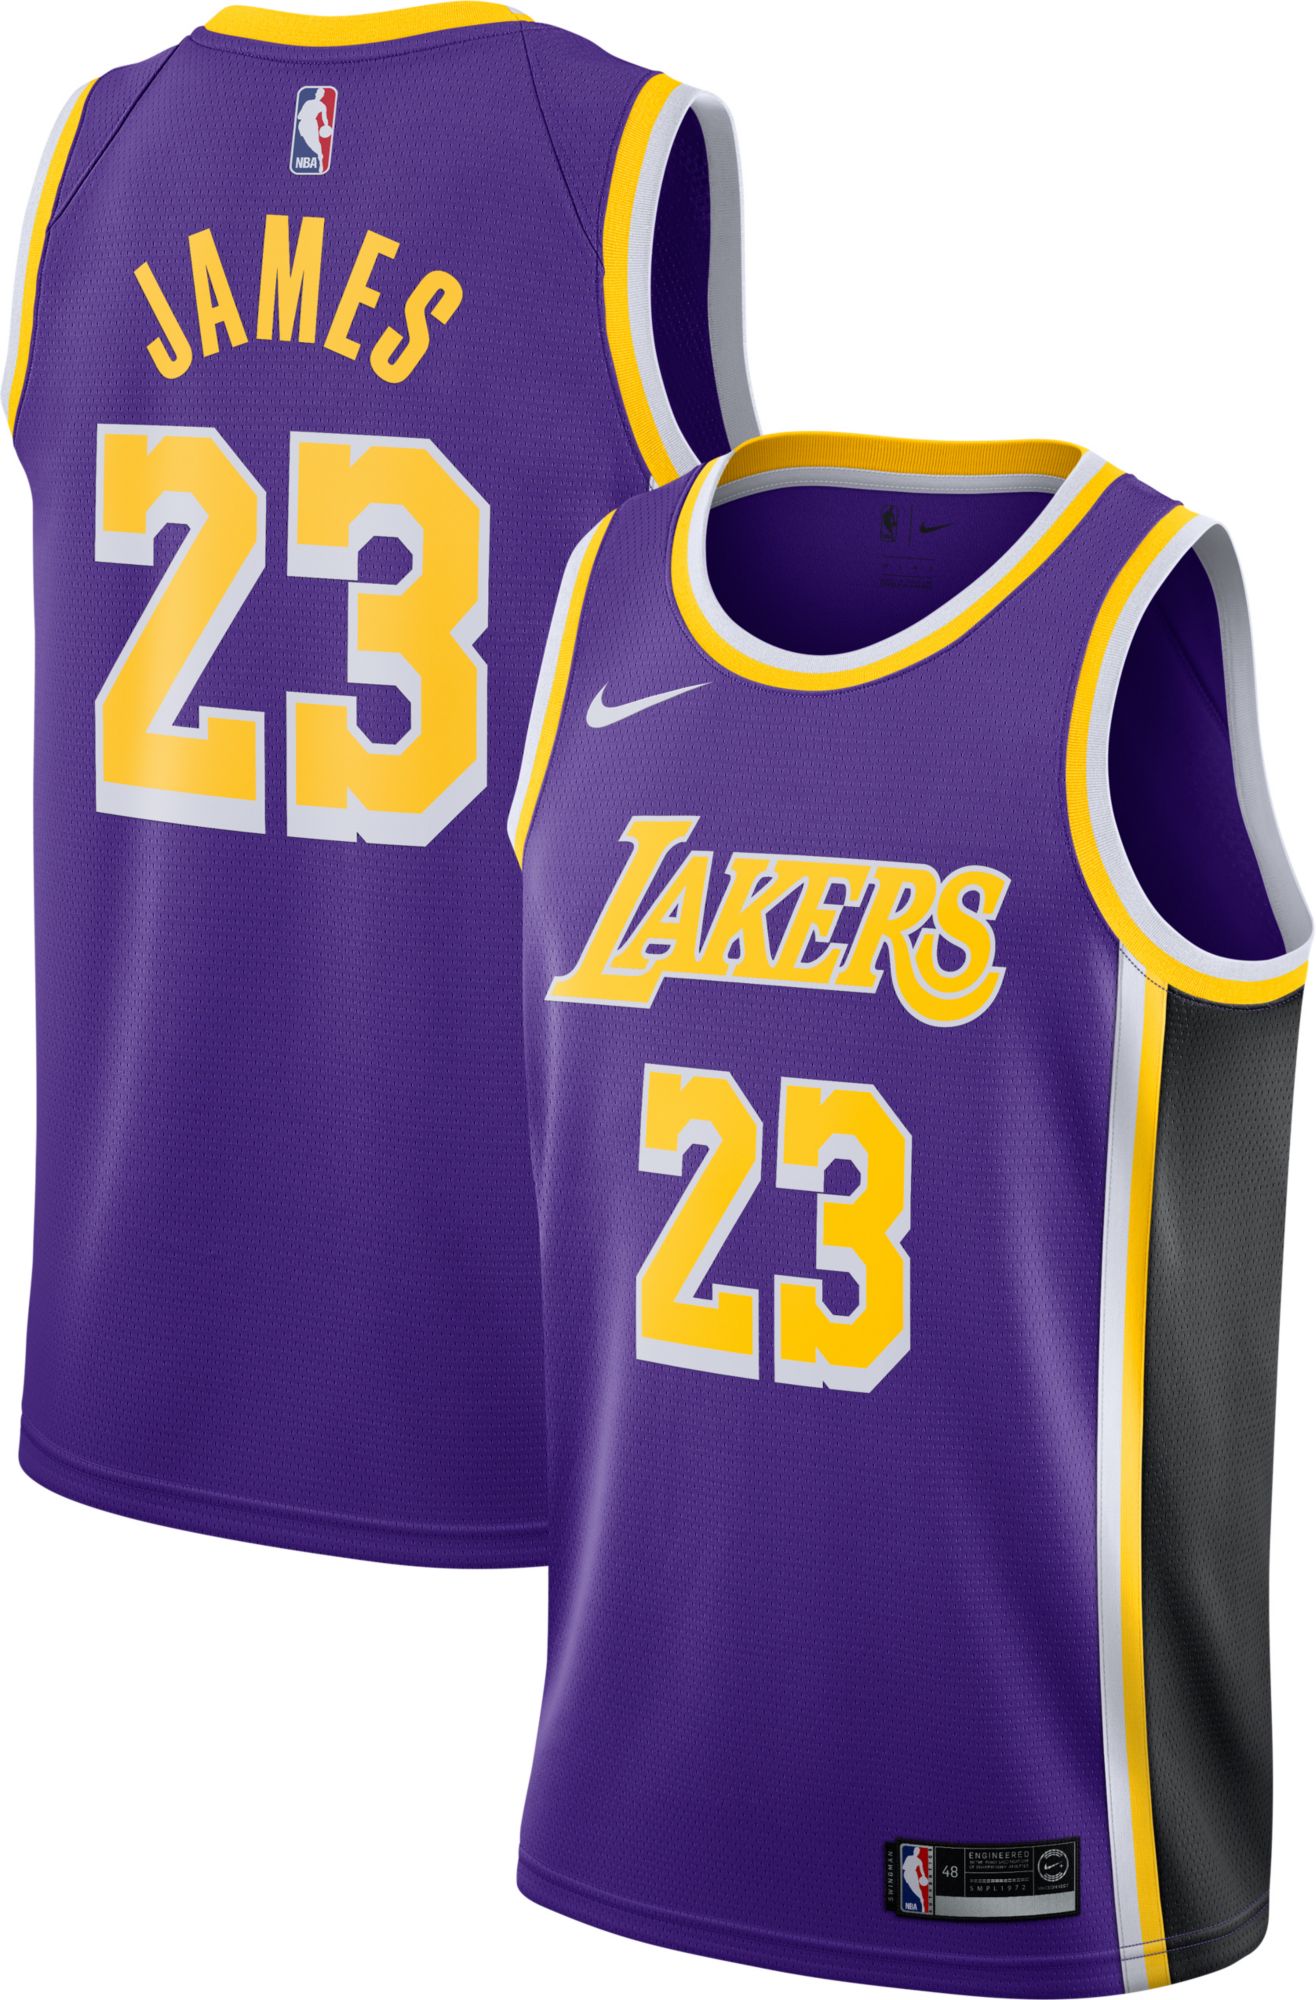 lebron james jersey youth small